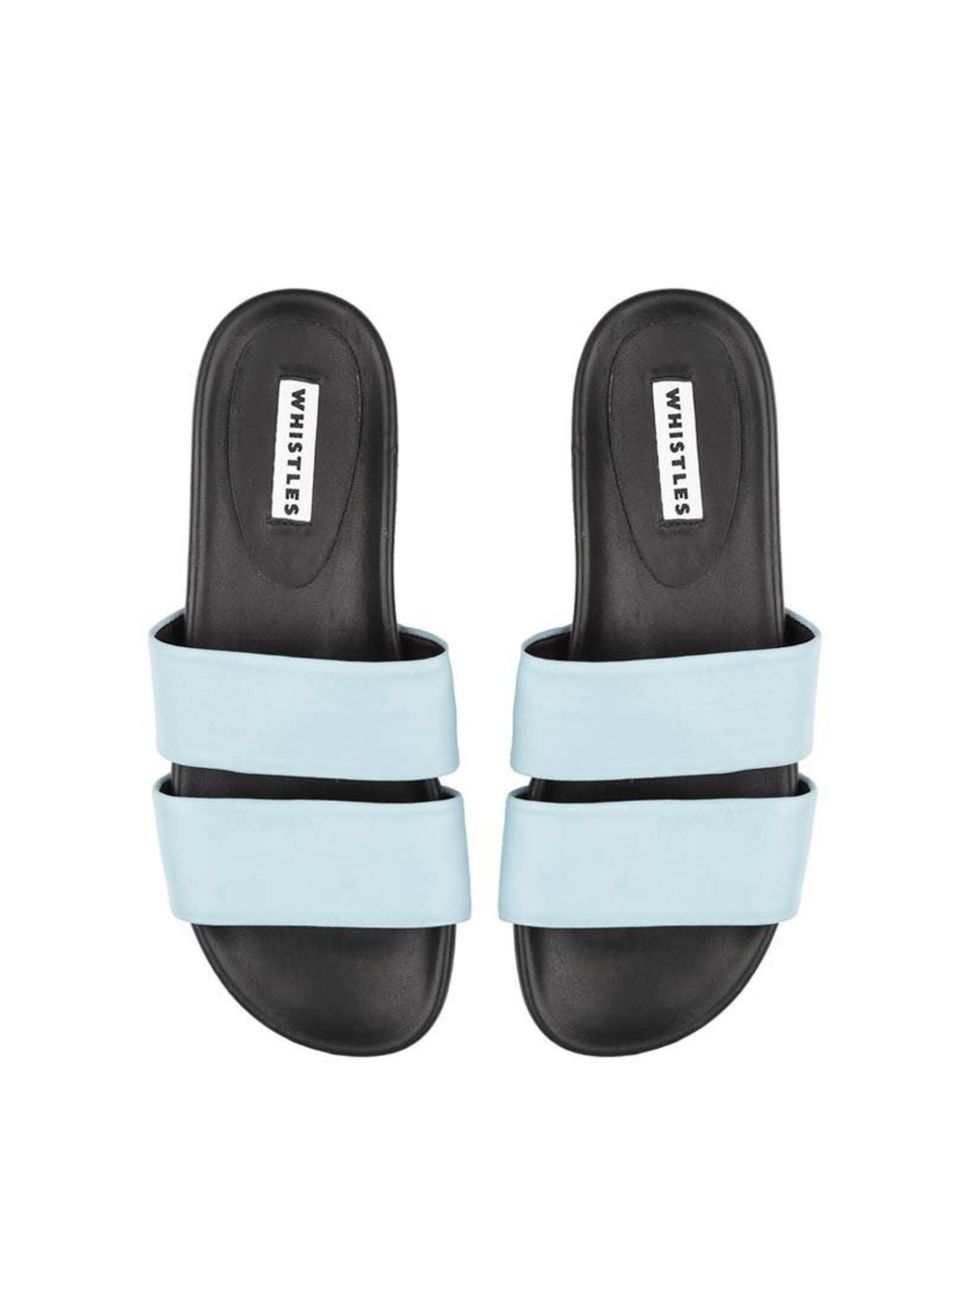 <p>Pair with white or pale denim in the sun.</p><p><a href="http://www.whistles.co.uk/fcp/product/whistles//maddy-double-band-poolslide/903000062025">Whistles</a> sandals, £115</p>